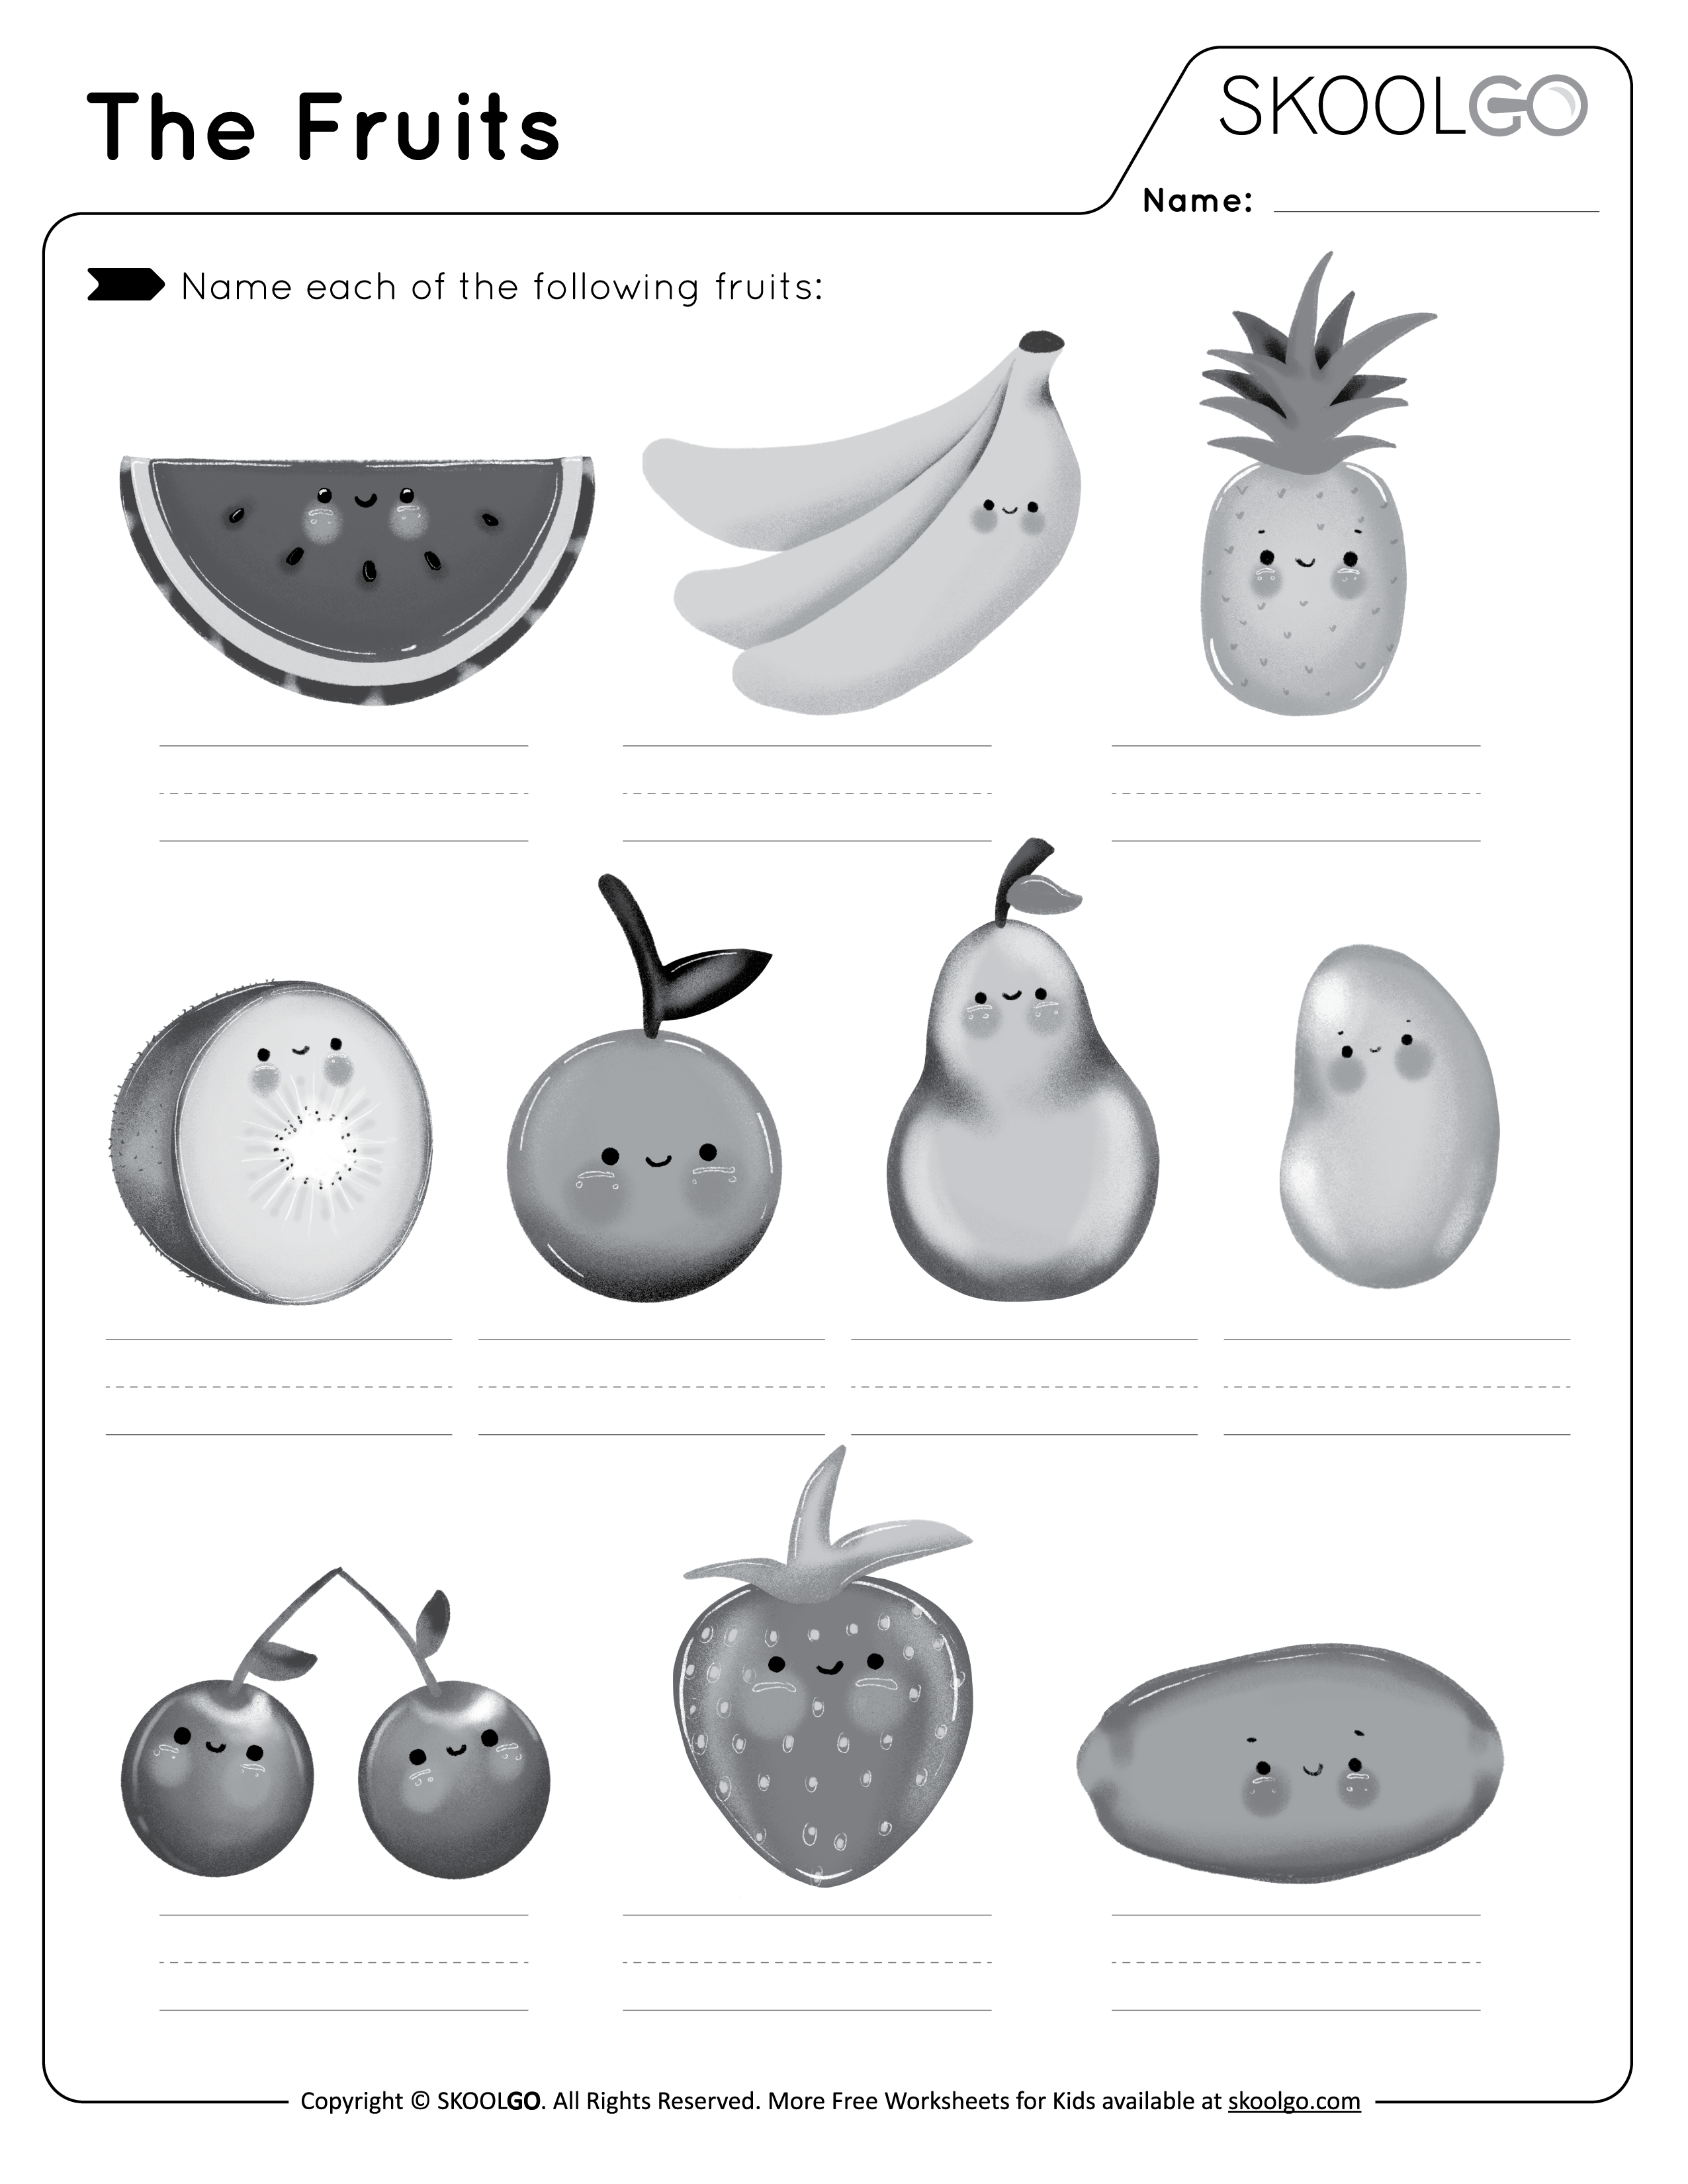 The Fruits - Free Black and White Worksheet Activity for Kids